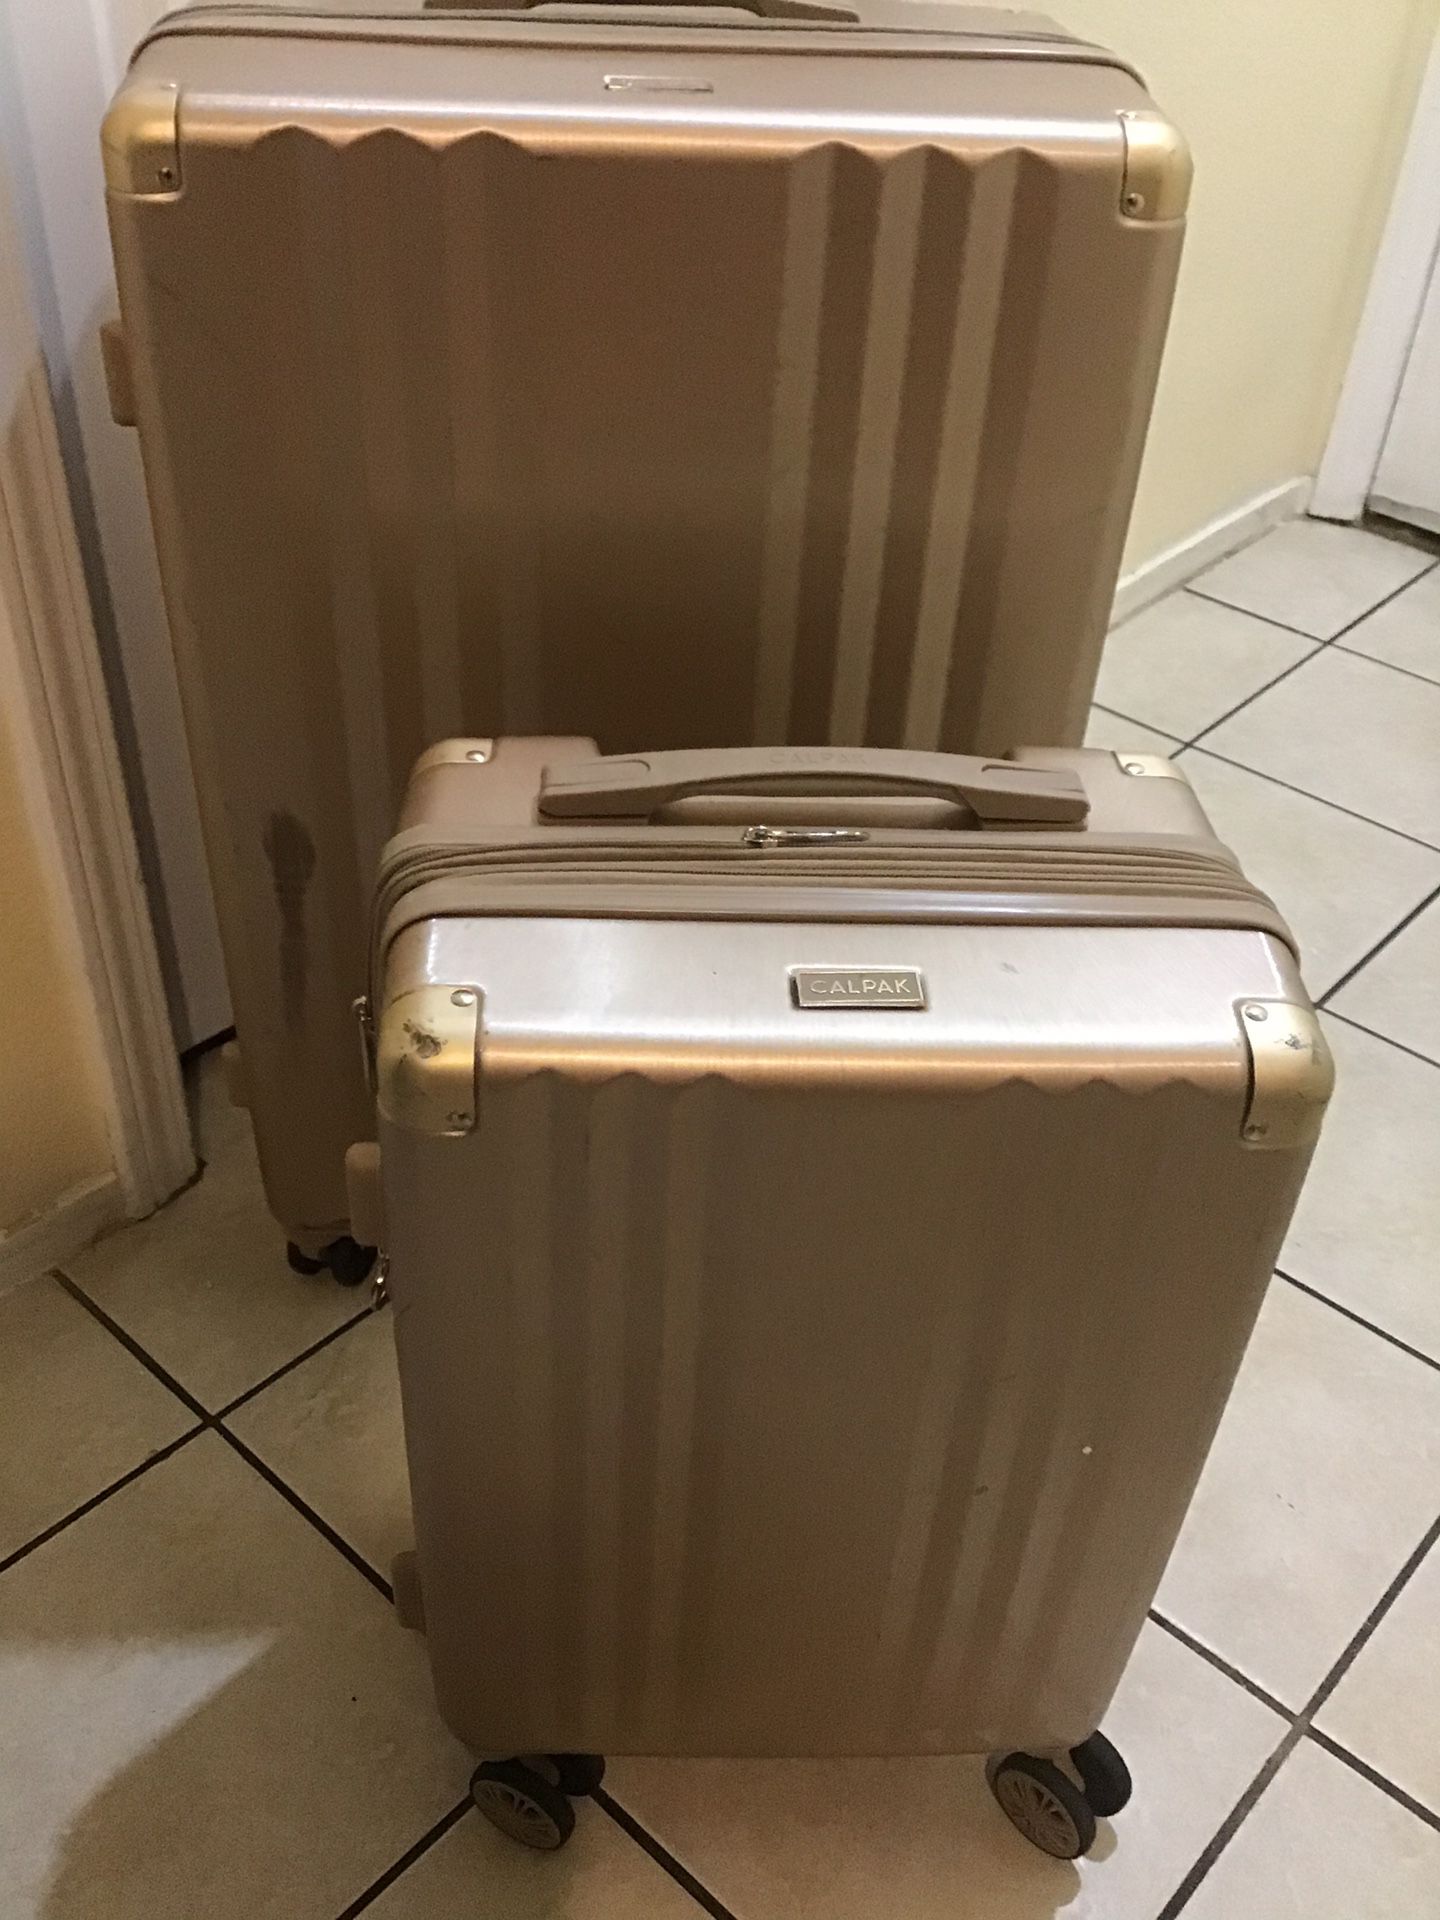 Calpak 2pc RoseGold Luggage set / 1 carry-on 22” and 1 large 30” check in used in good condition minor scuff on outside exterior clean inside